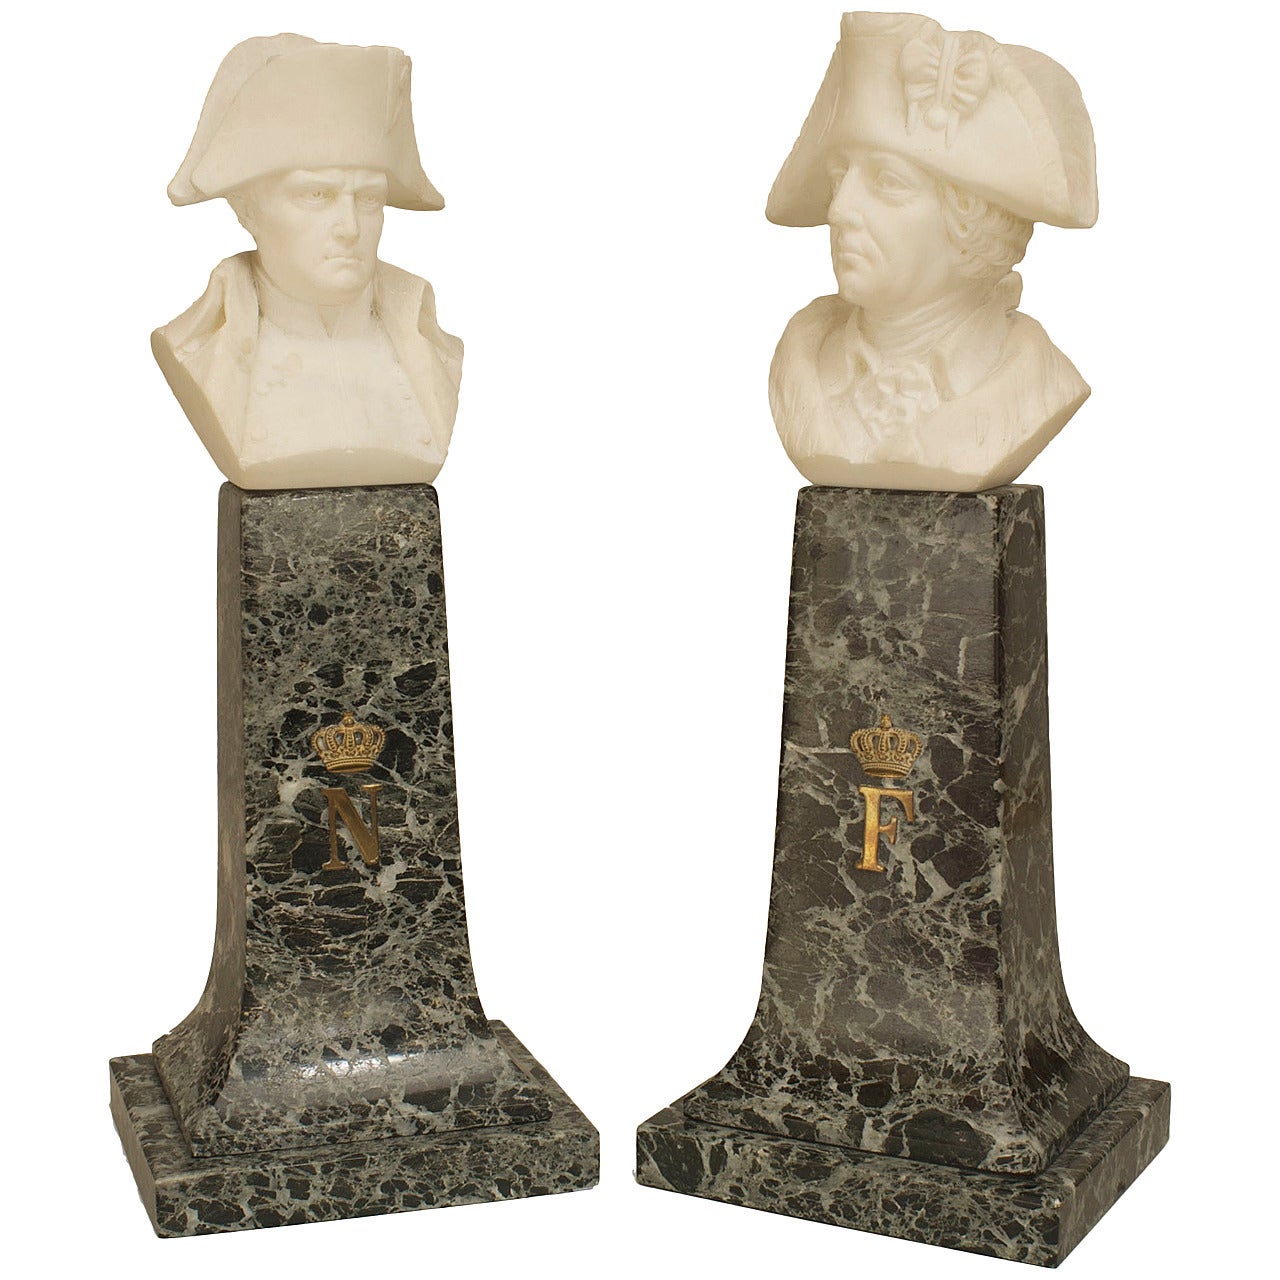 Pair of Alabaster Fredrick the Great and Napoleon Busts